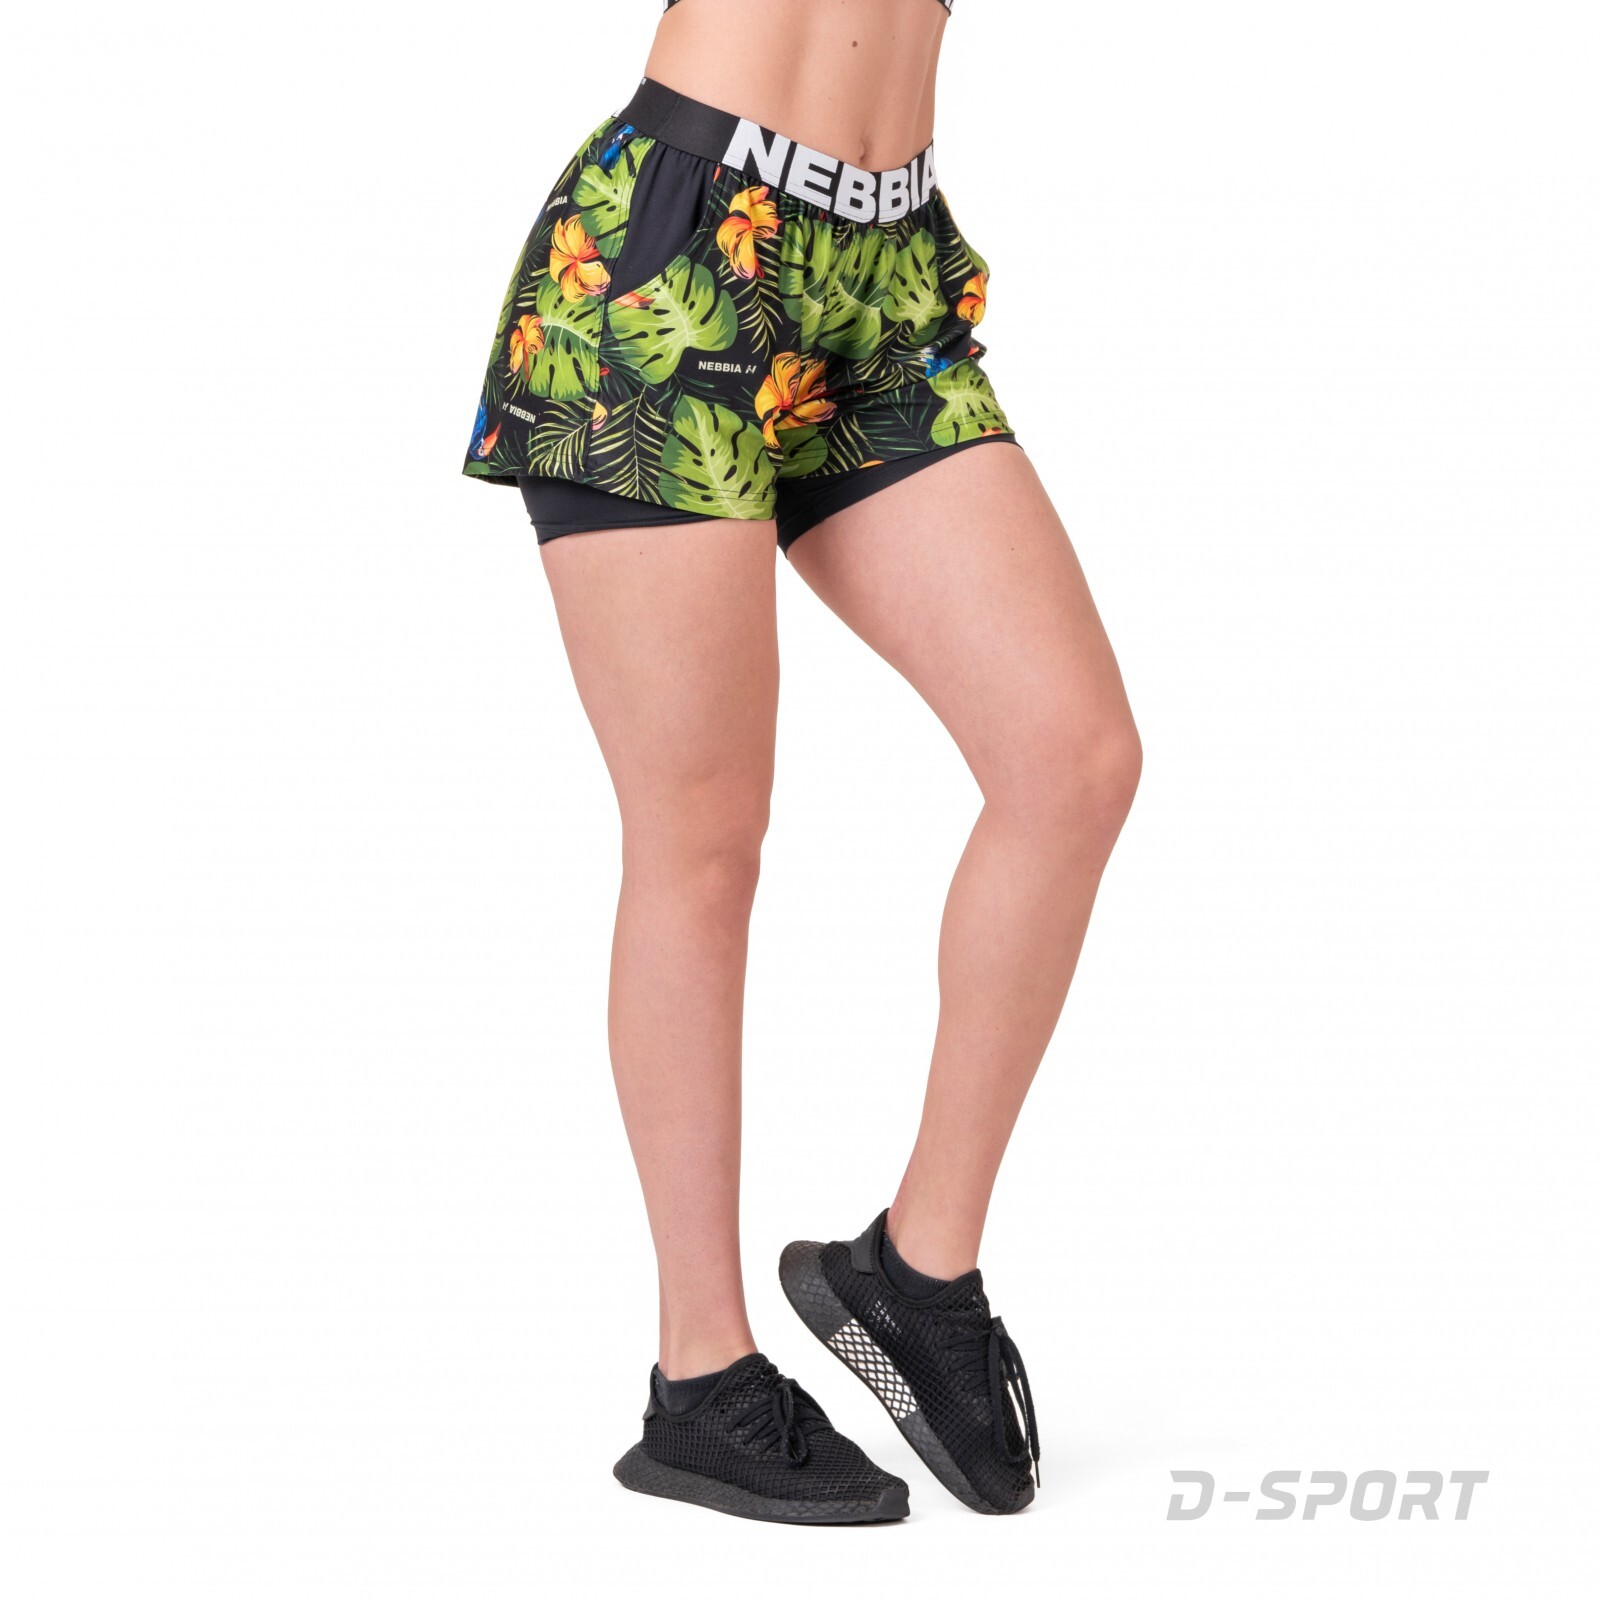 NEBBIA High-energy double layer shorts